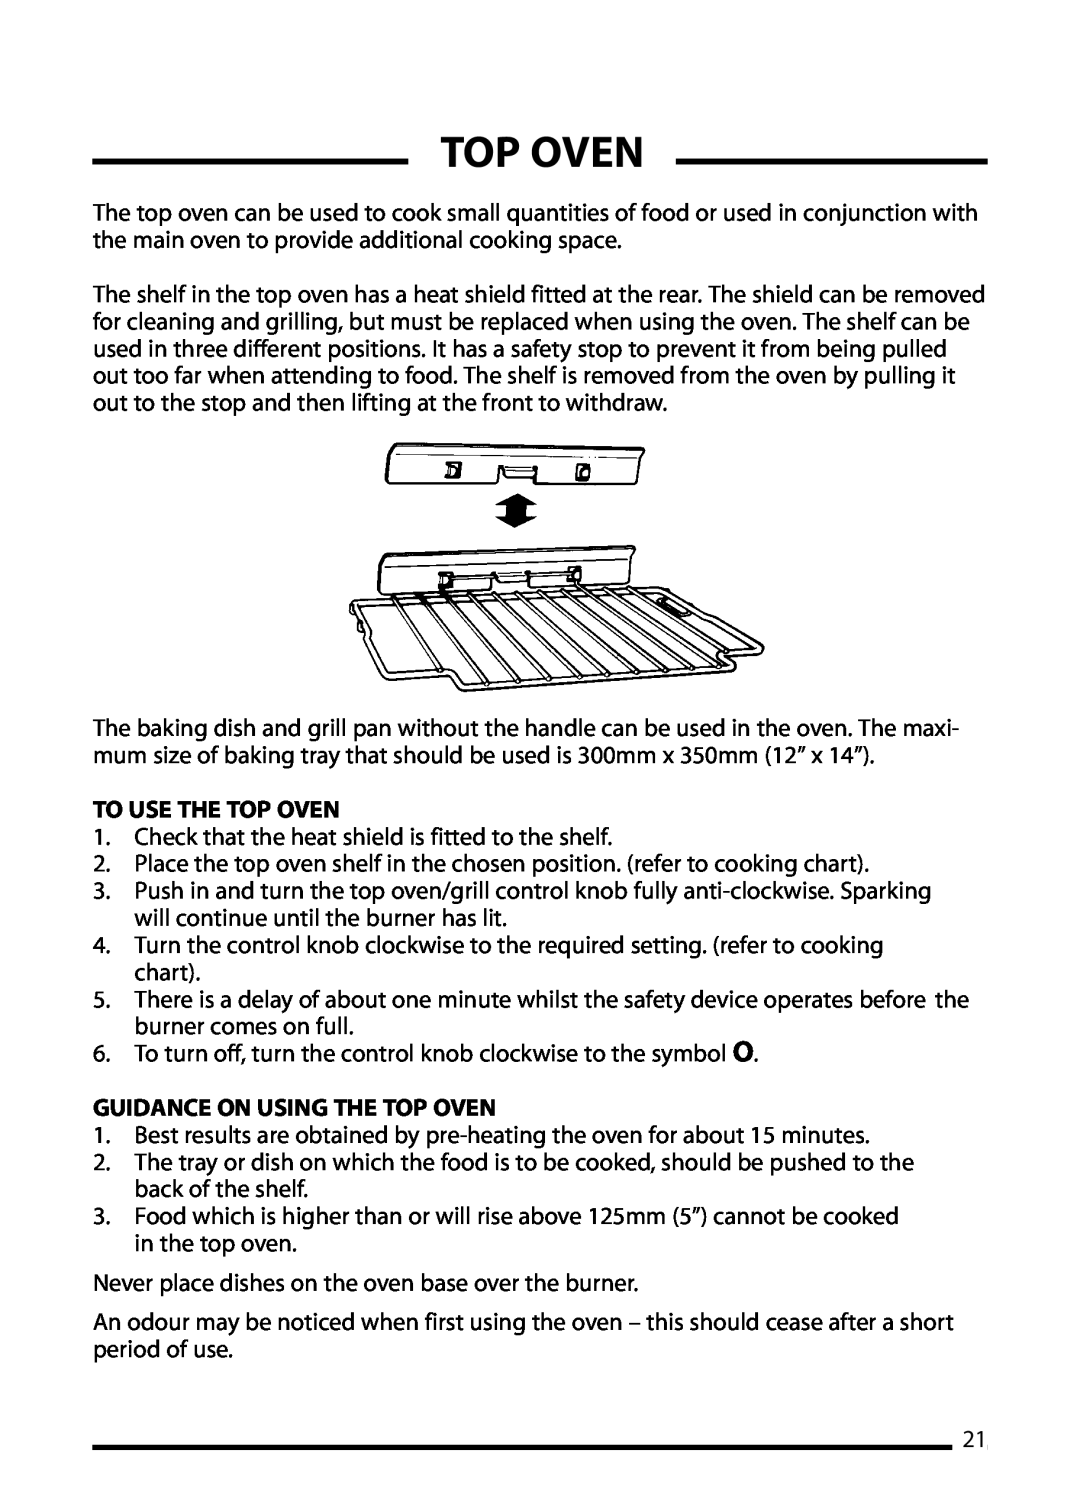 Cannon 10410G, ICON 600 installation instructions To Use The Top Oven, Guidance On Using The Top Oven 